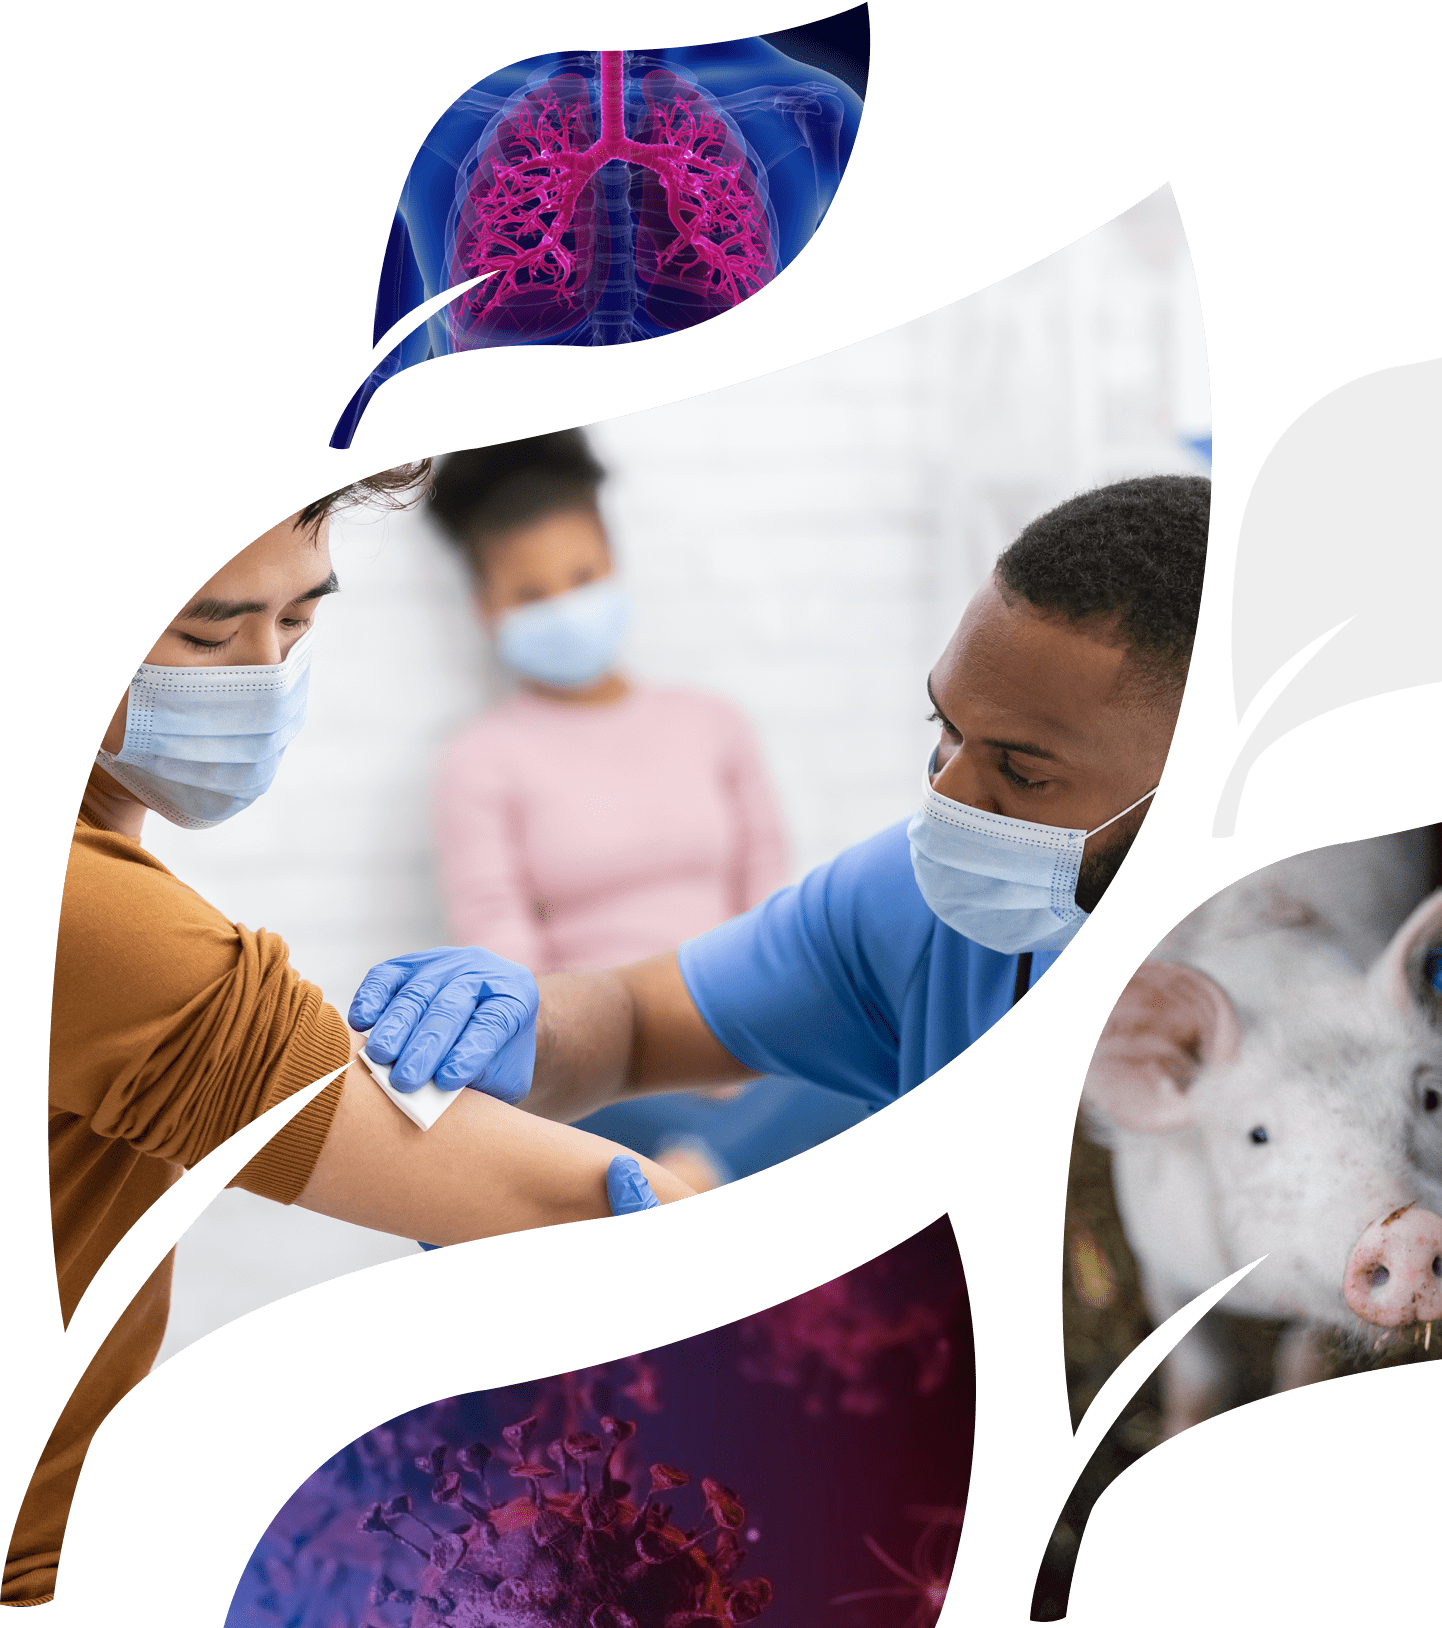 Image representing iBio's areas of focus - include vaccines for human health and animal health, a fibrotic therapeutic candidate, and further oncology therapeutics.